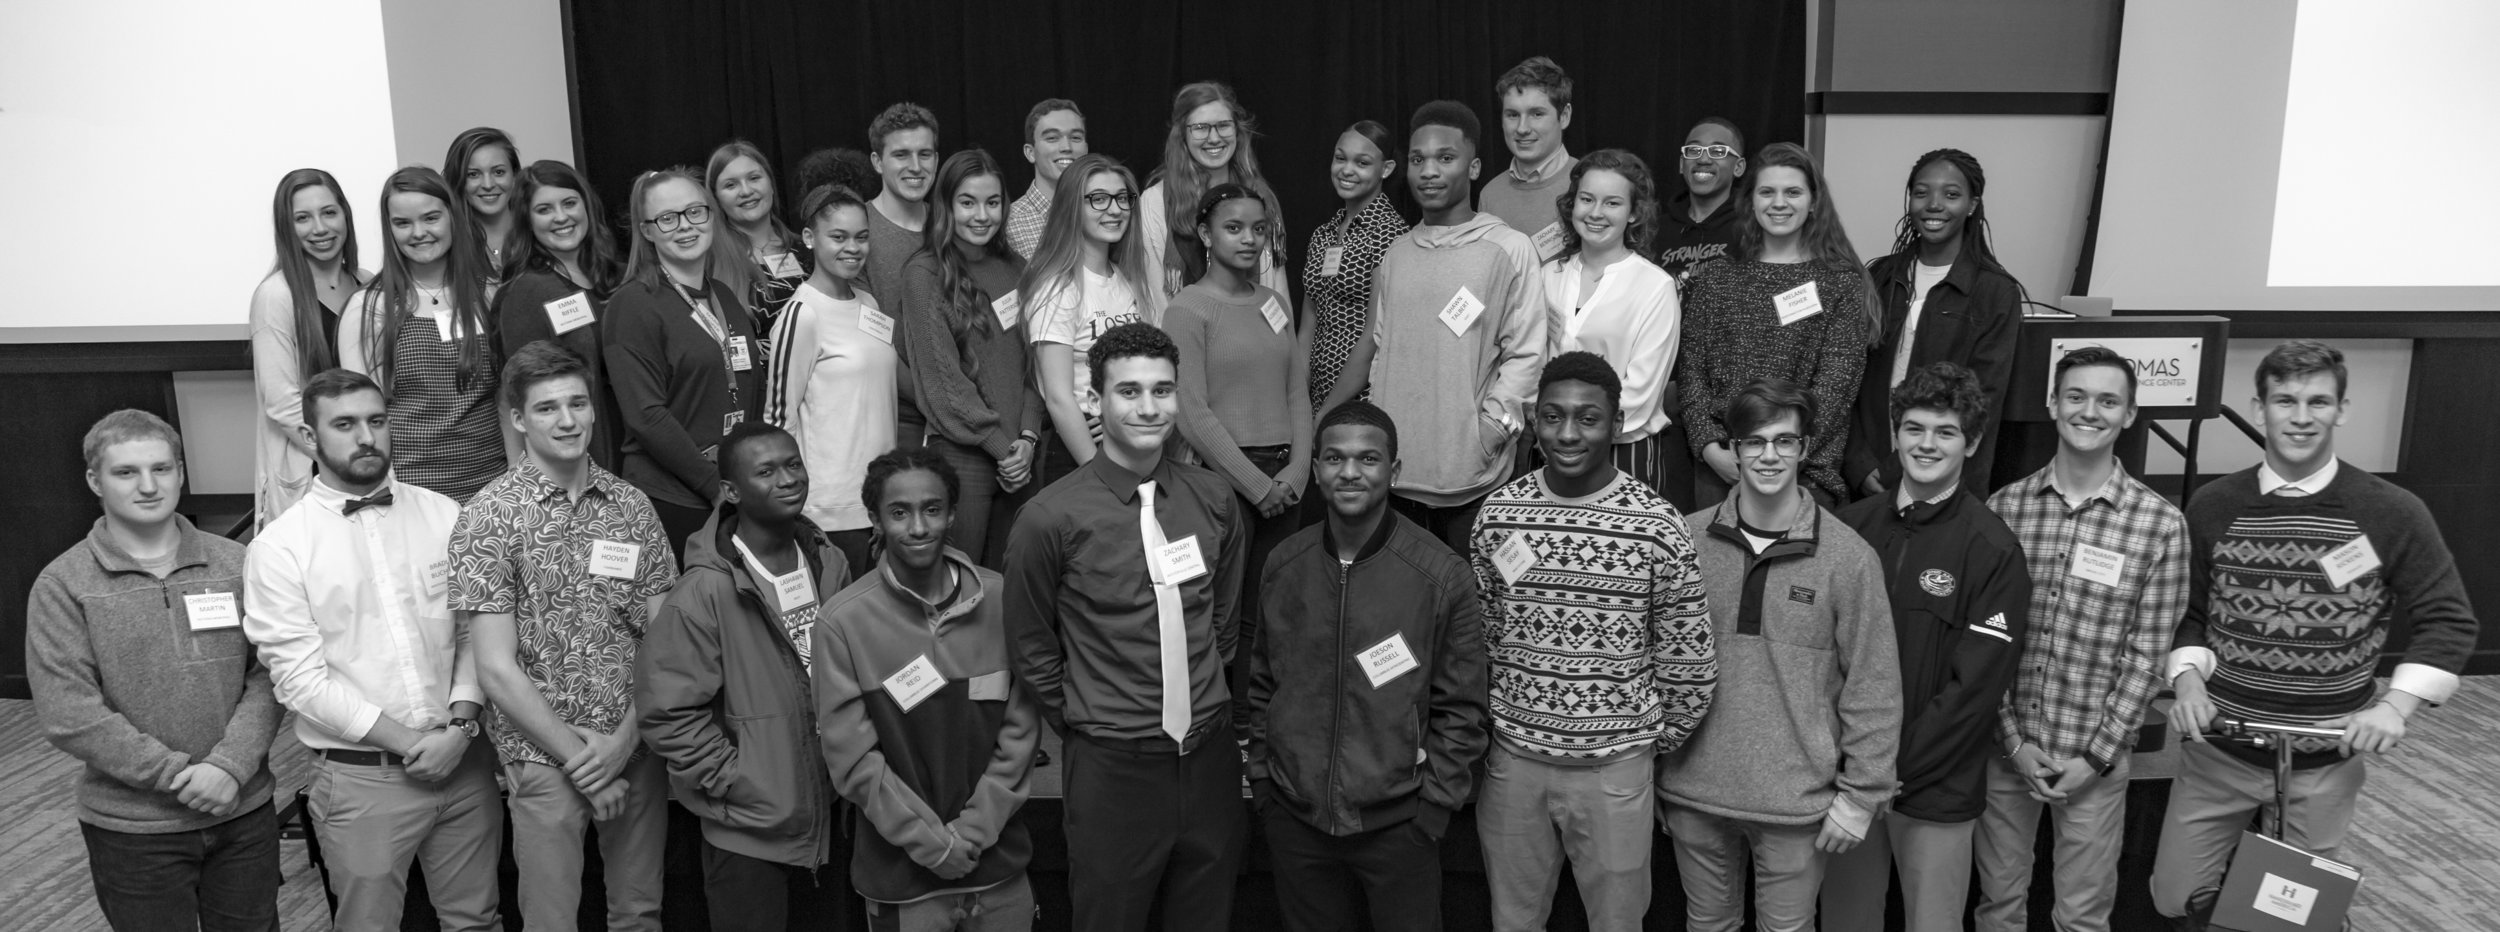 IMG_9089 R BW Official Team Pic 2019 32 of 36 students.jpg